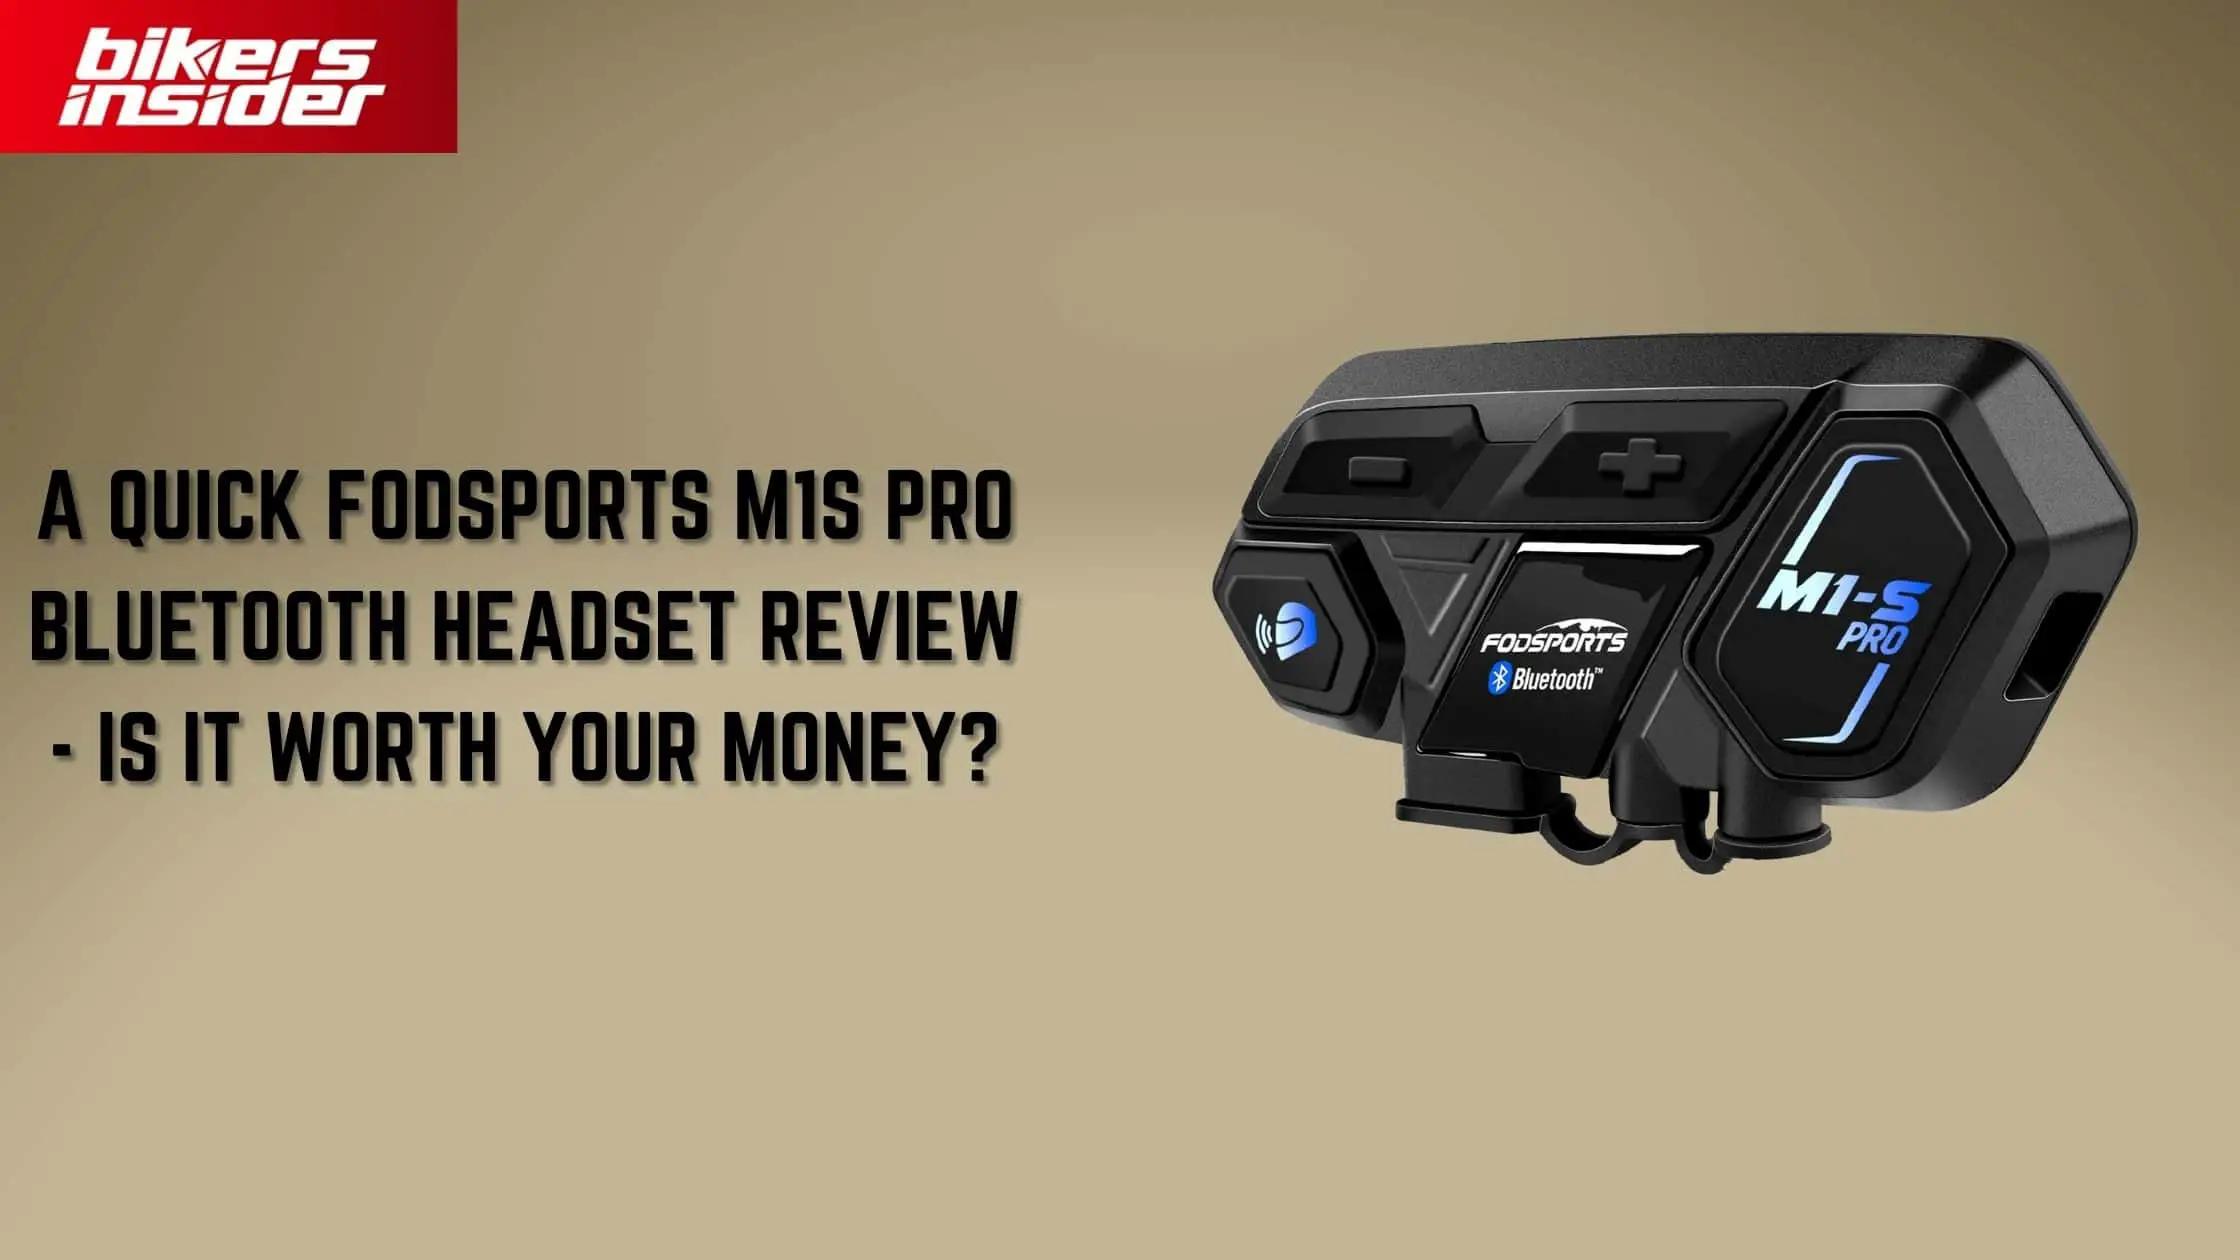 Fodsports M1S Pro Bluetooth Comm System Review! - Bikers Insider